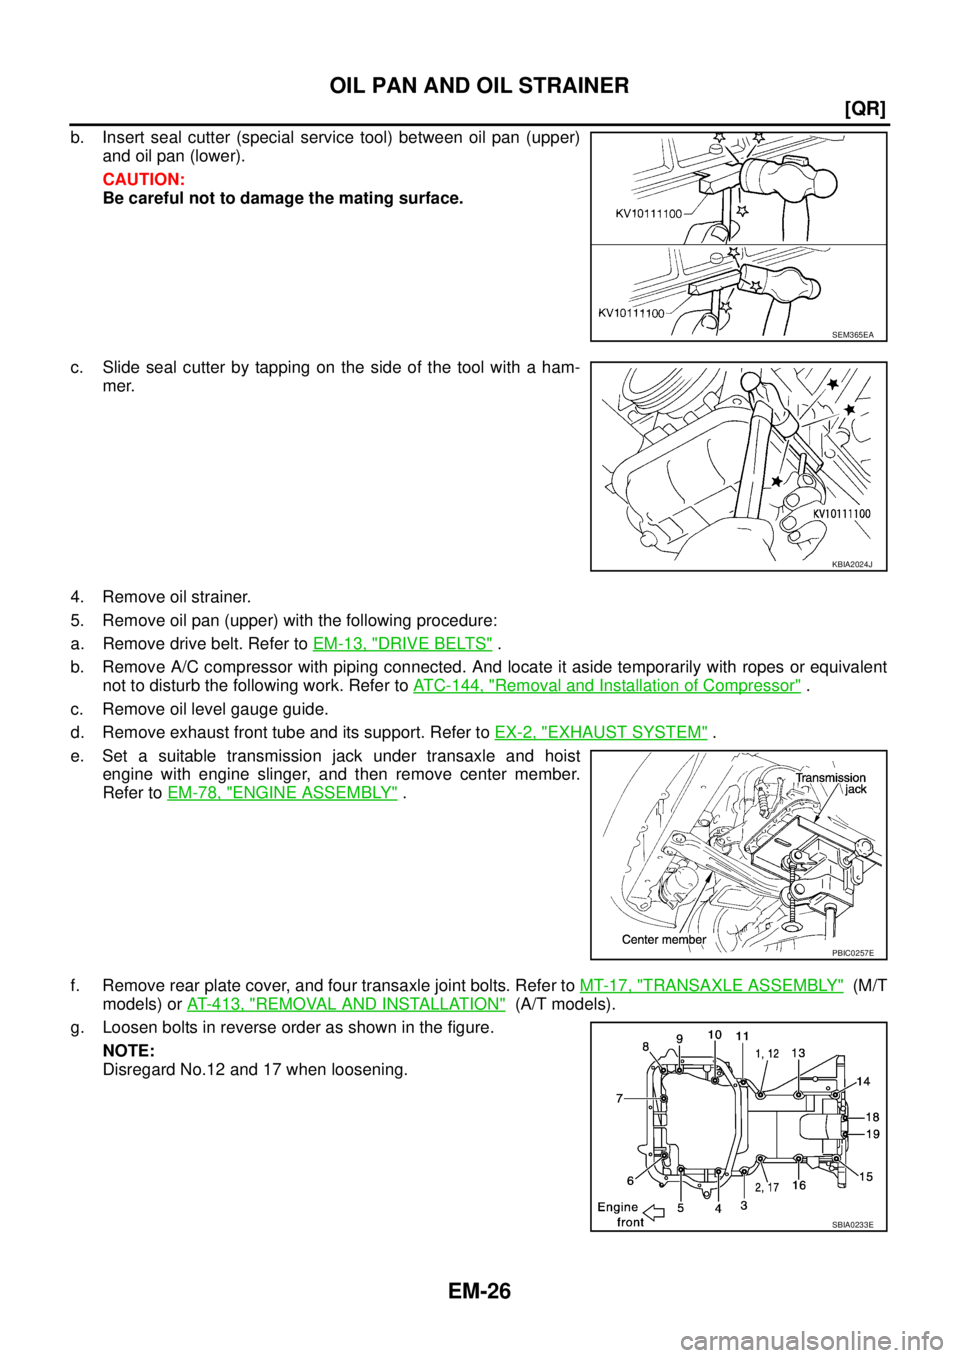 NISSAN X-TRAIL 2003  Service User Guide EM-26
[QR]
OIL PAN AND OIL STRAINER
 
b. Insert seal cutter (special service tool) between oil pan (upper)
and oil pan (lower).
CAUTION:
Be careful not to damage the mating surface.
c. Slide seal cutt